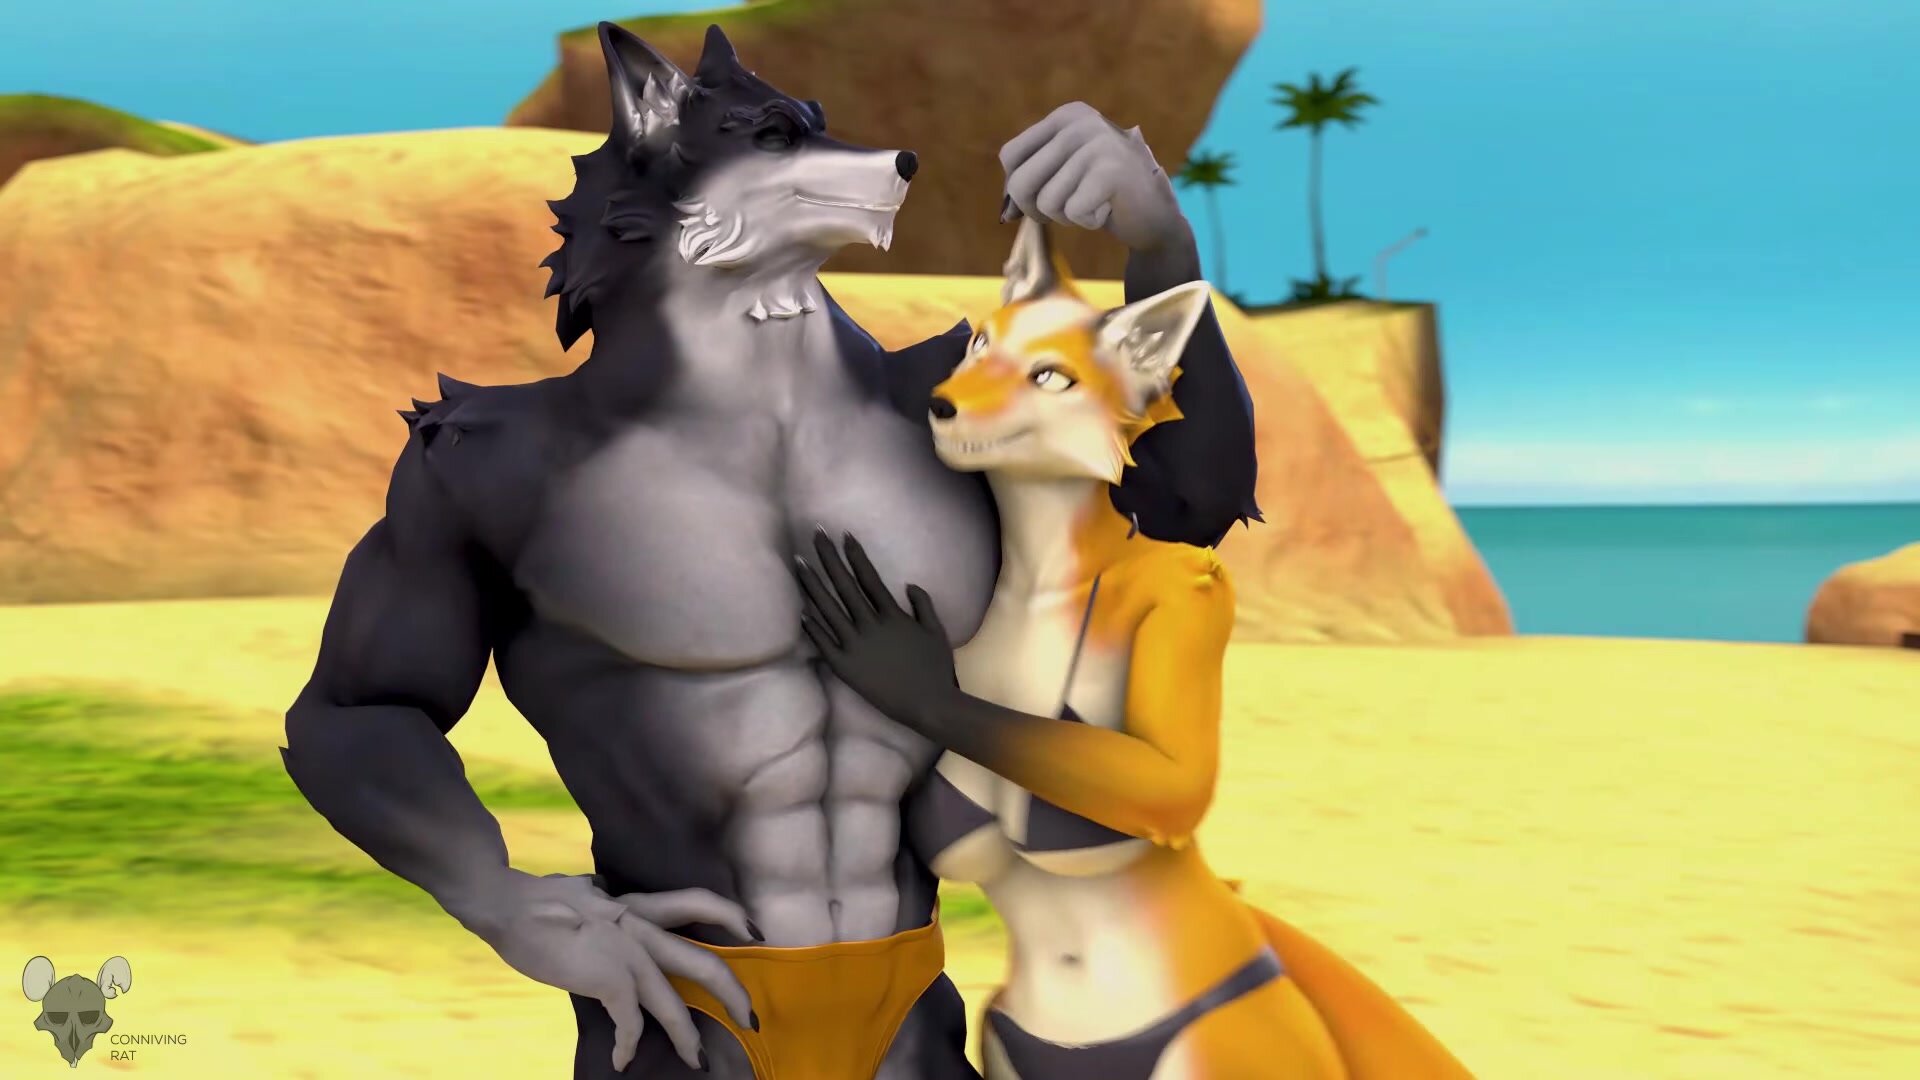 Furry Porn Swimsuit - Muscular furry sph - ThisVid.com